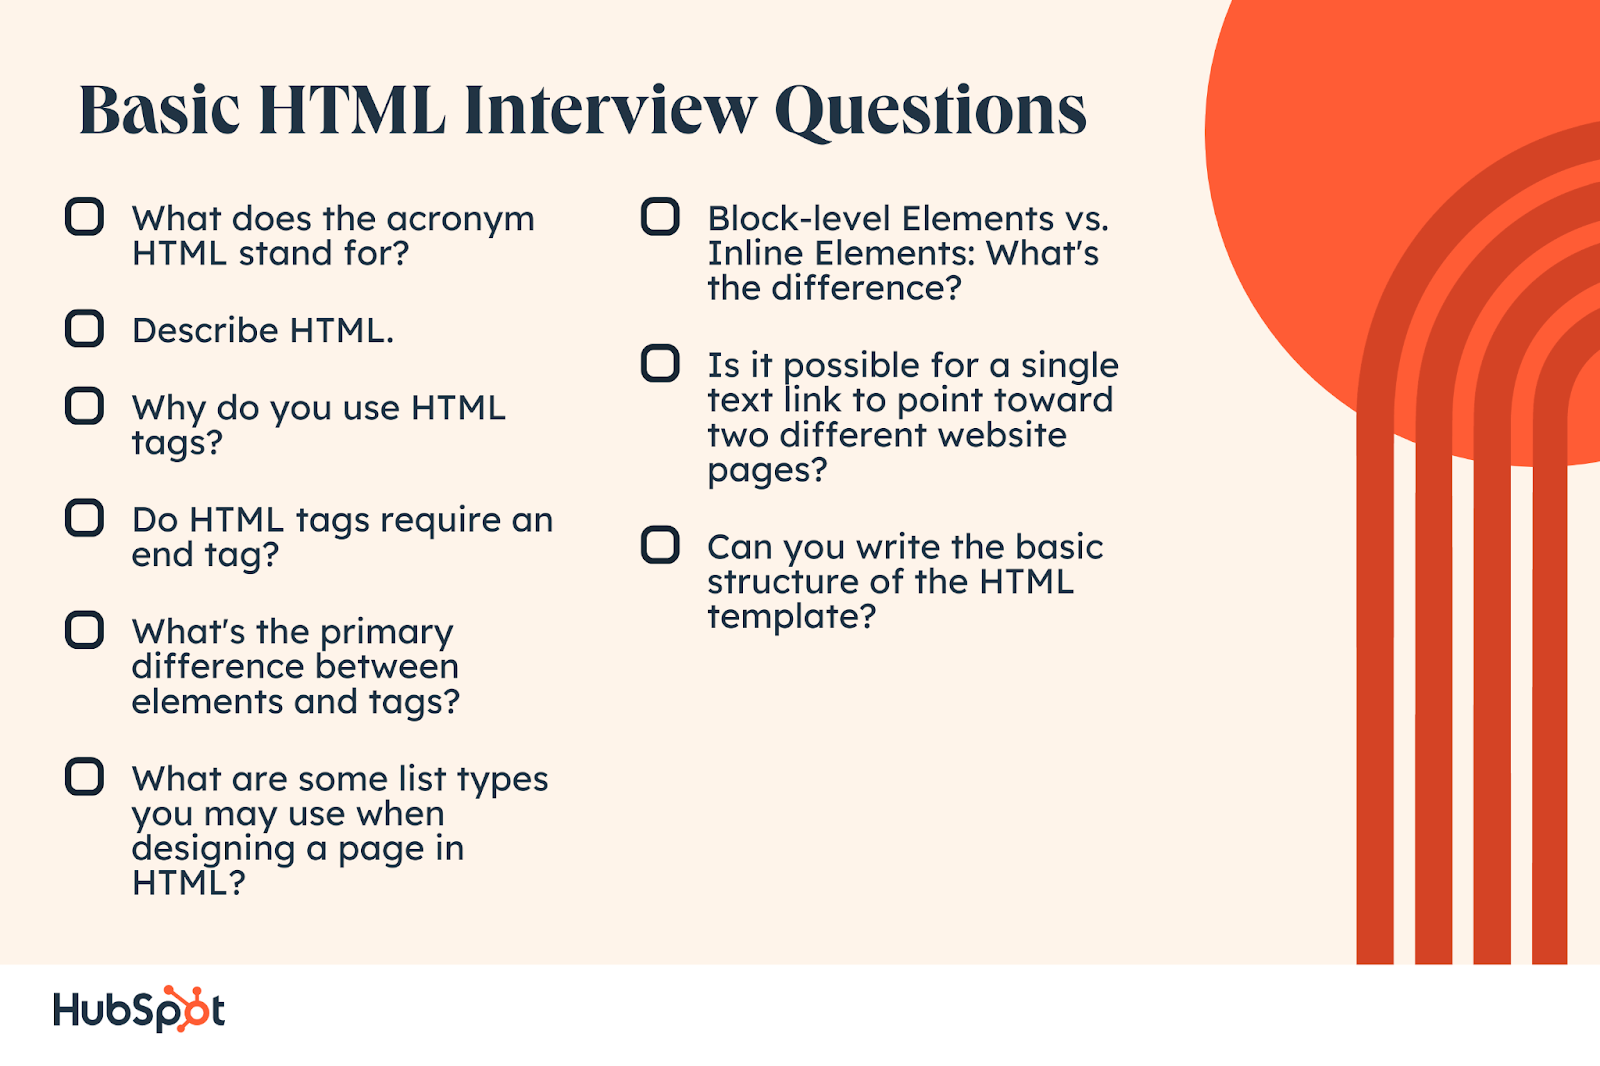 What does the acronym HTML stand for? Basic HTML Interview Questions: Describe HTML. Why do you use HTML tags? Do HTML tags require an end tag? What‘s the primary difference between elements and tags? What are some list types you may use when designing a page in HTML? Block-level Elements vs. Inline Elements: What’s the difference? Is it possible for a single text link to point toward two different website pages? Can you write the basic structure of the HTML template?